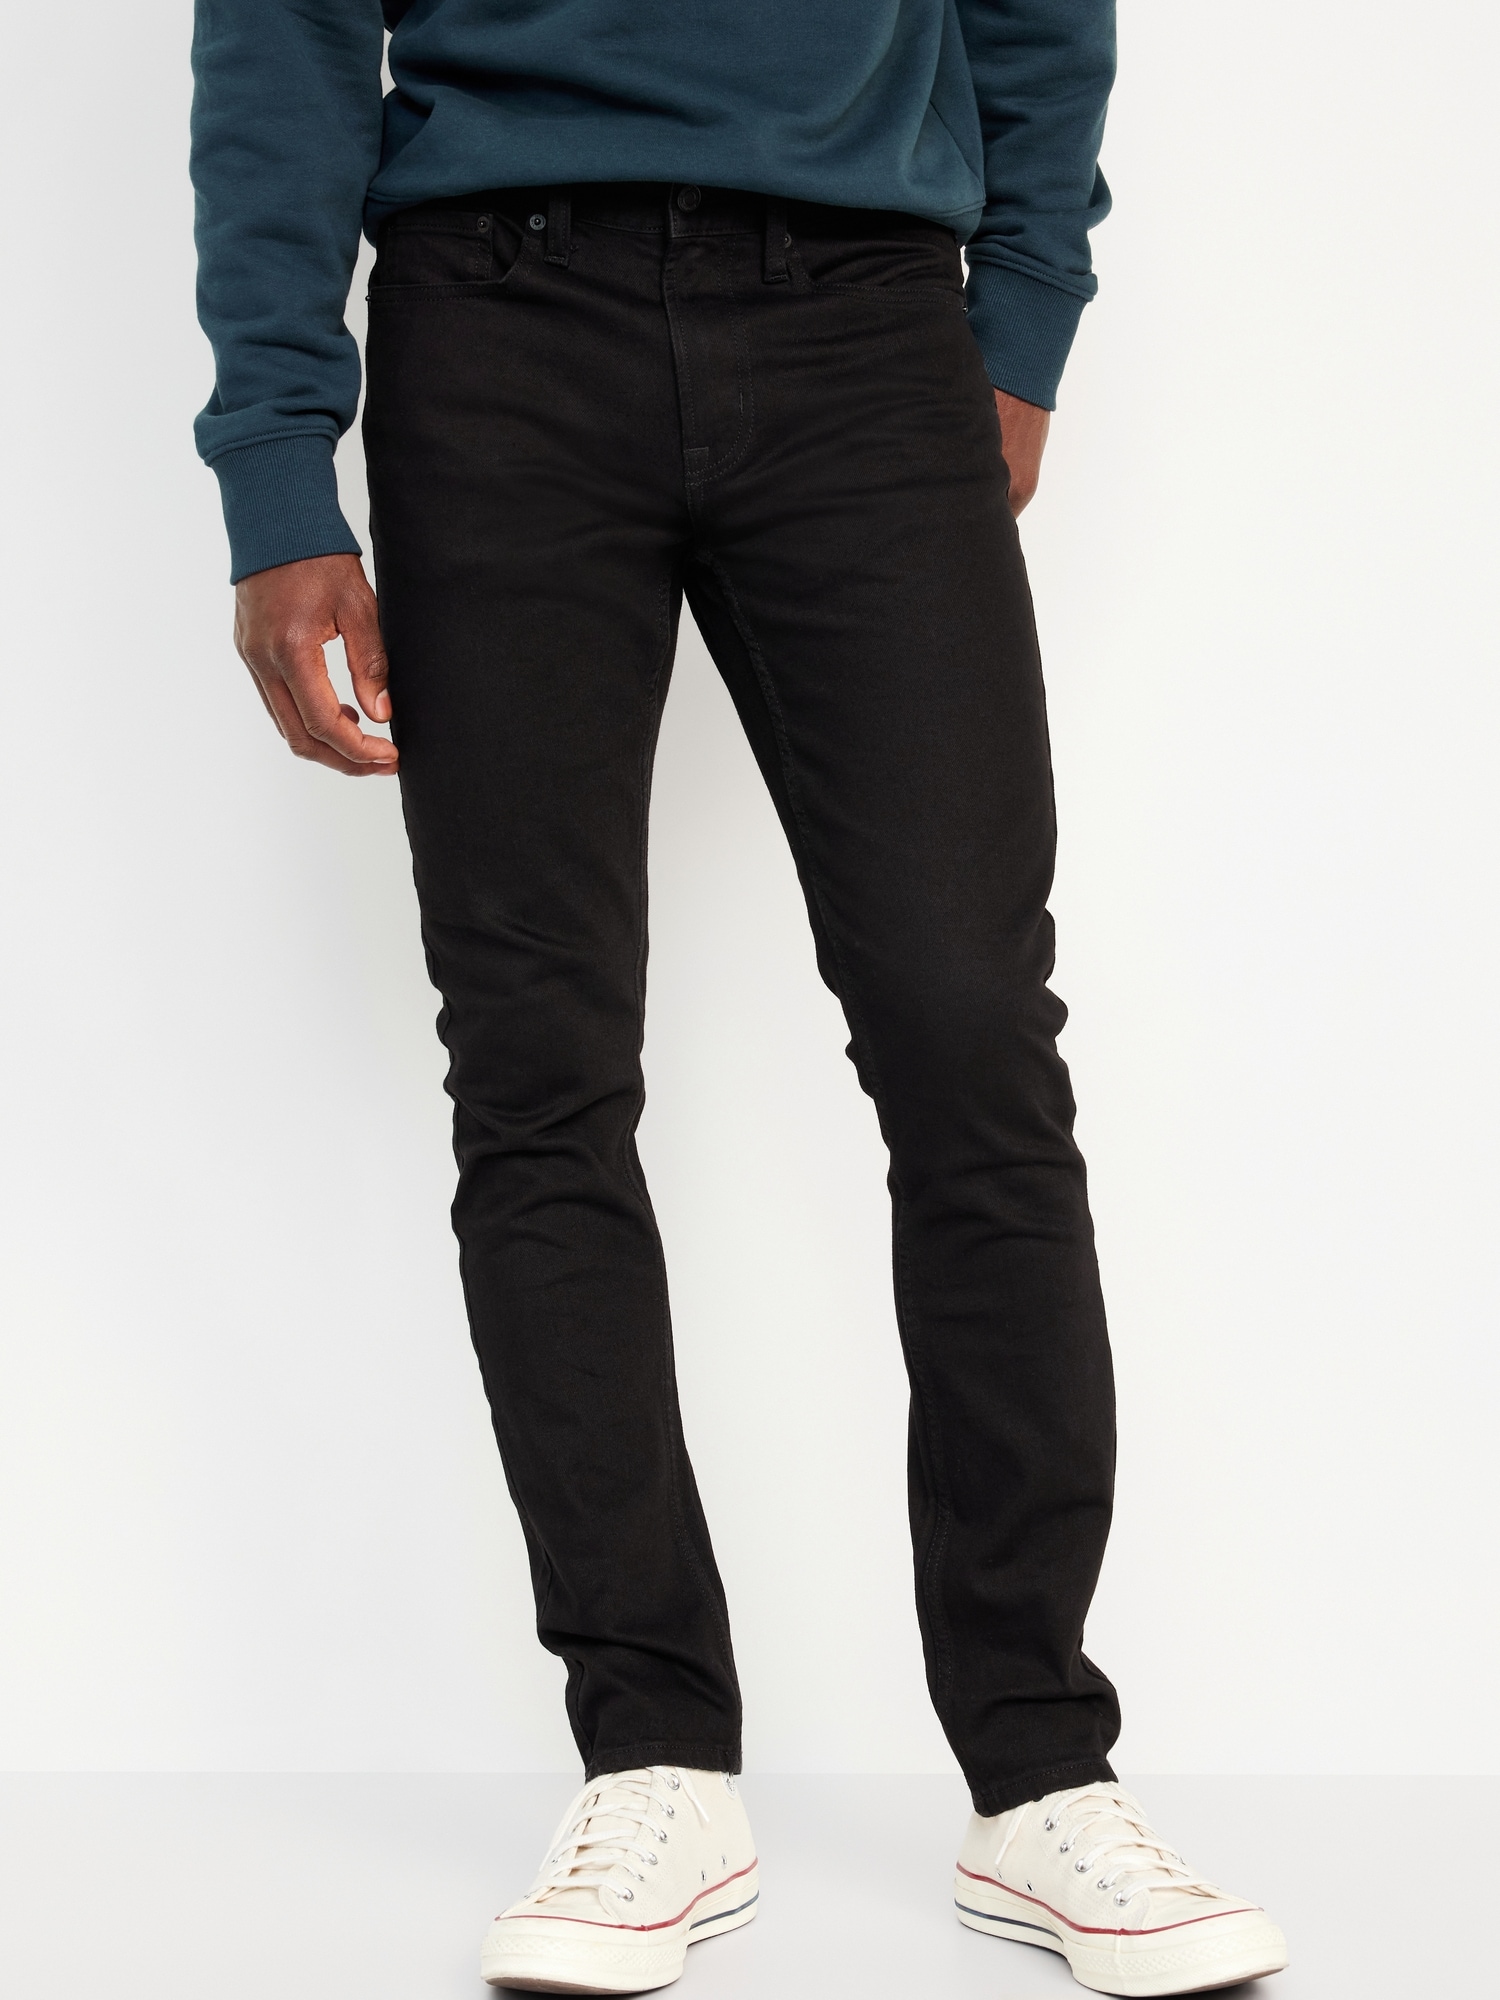 Button Fly Jeans for Men